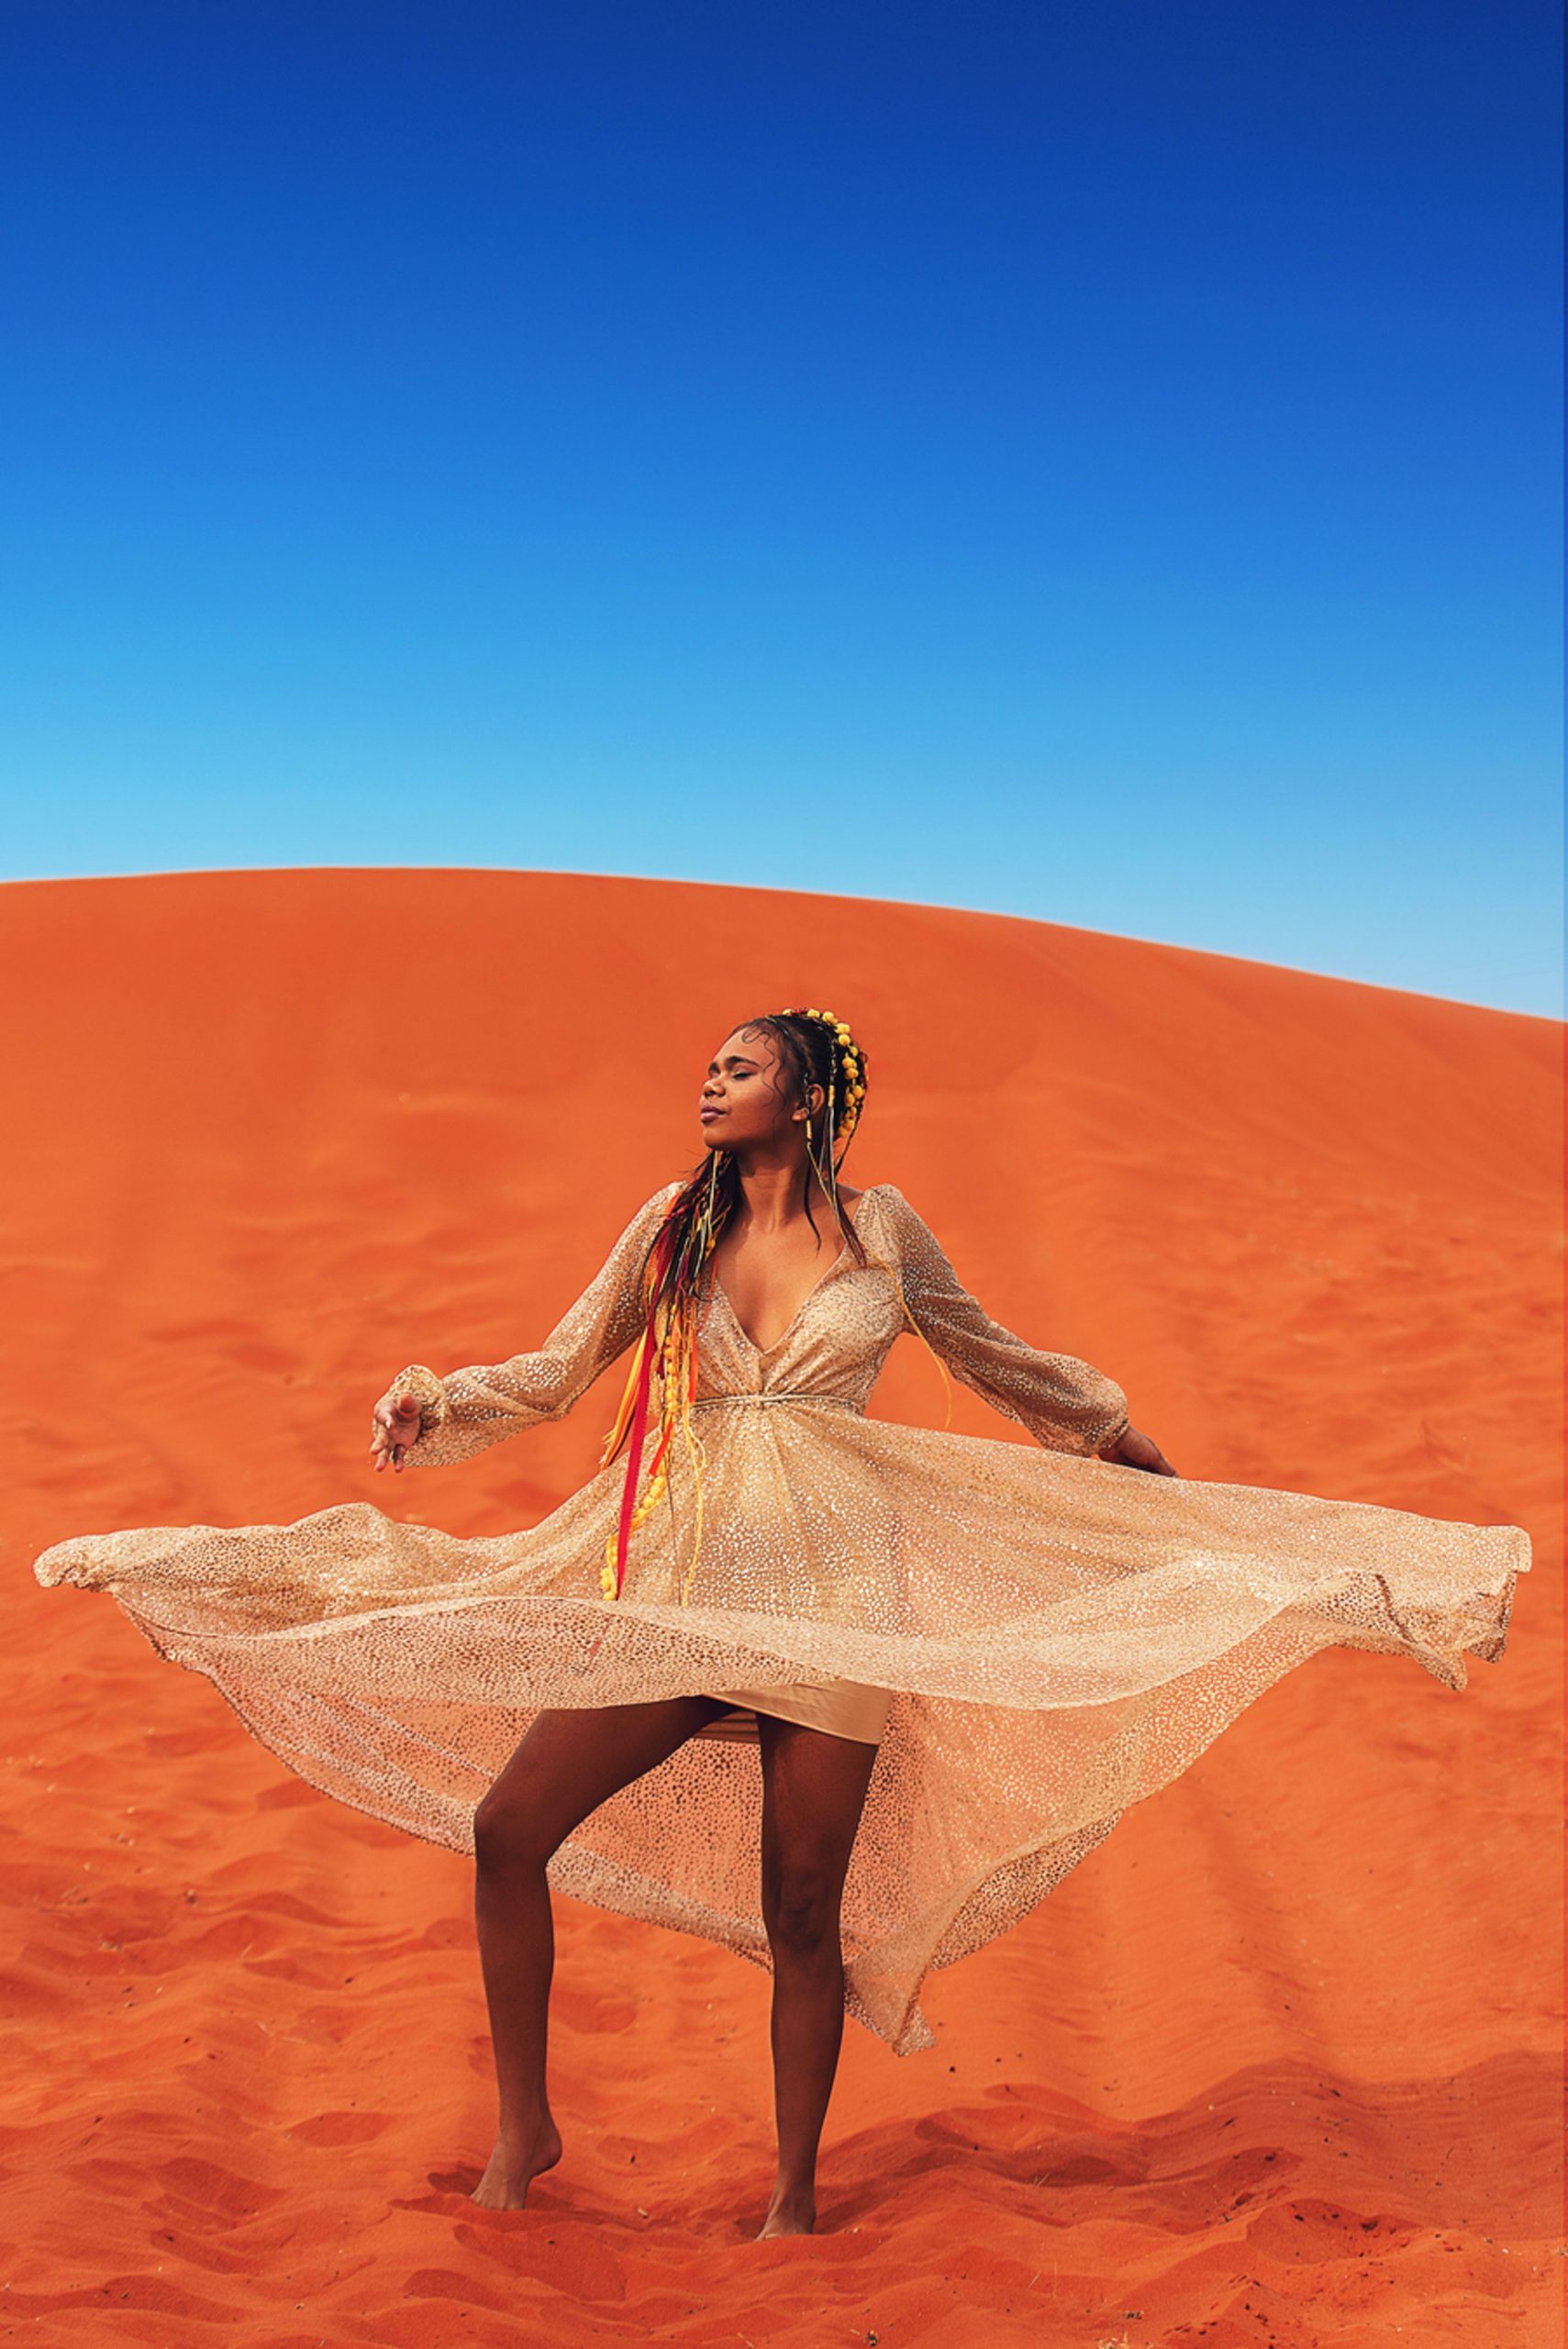 Aboriginal woman in the Australian outback, as photographed by Angel Riley.